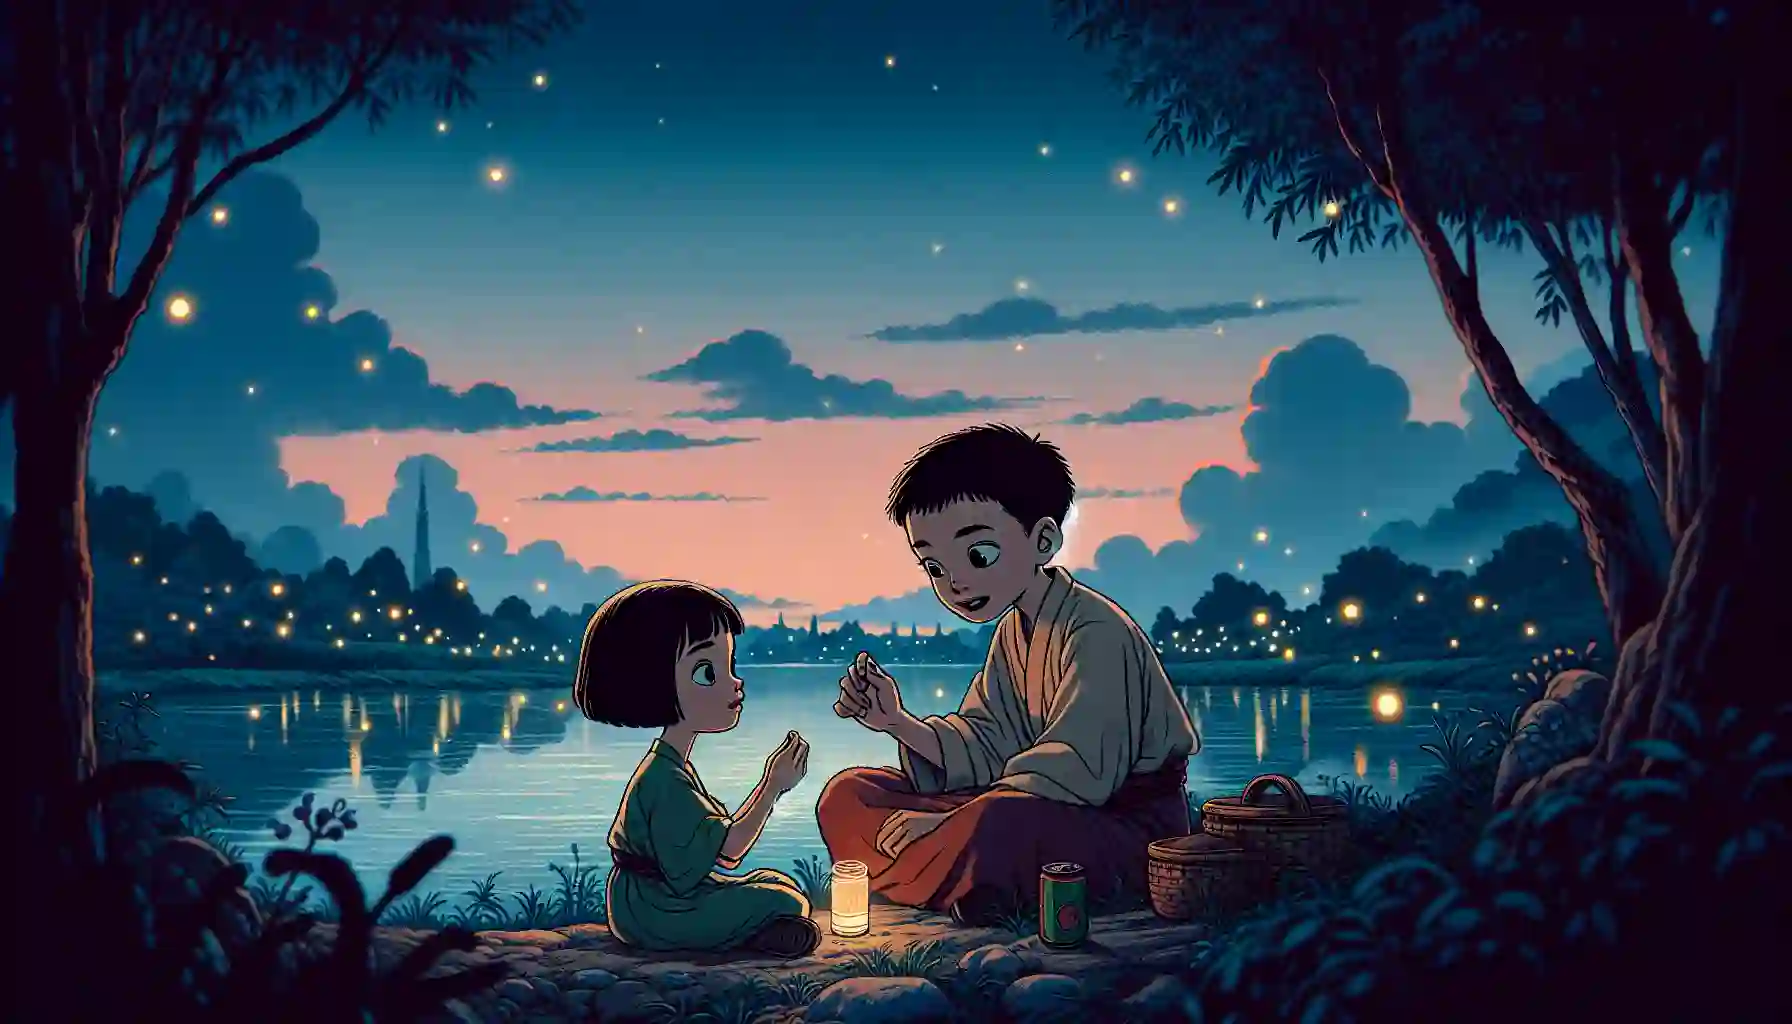 Grave of the Fireflies summary